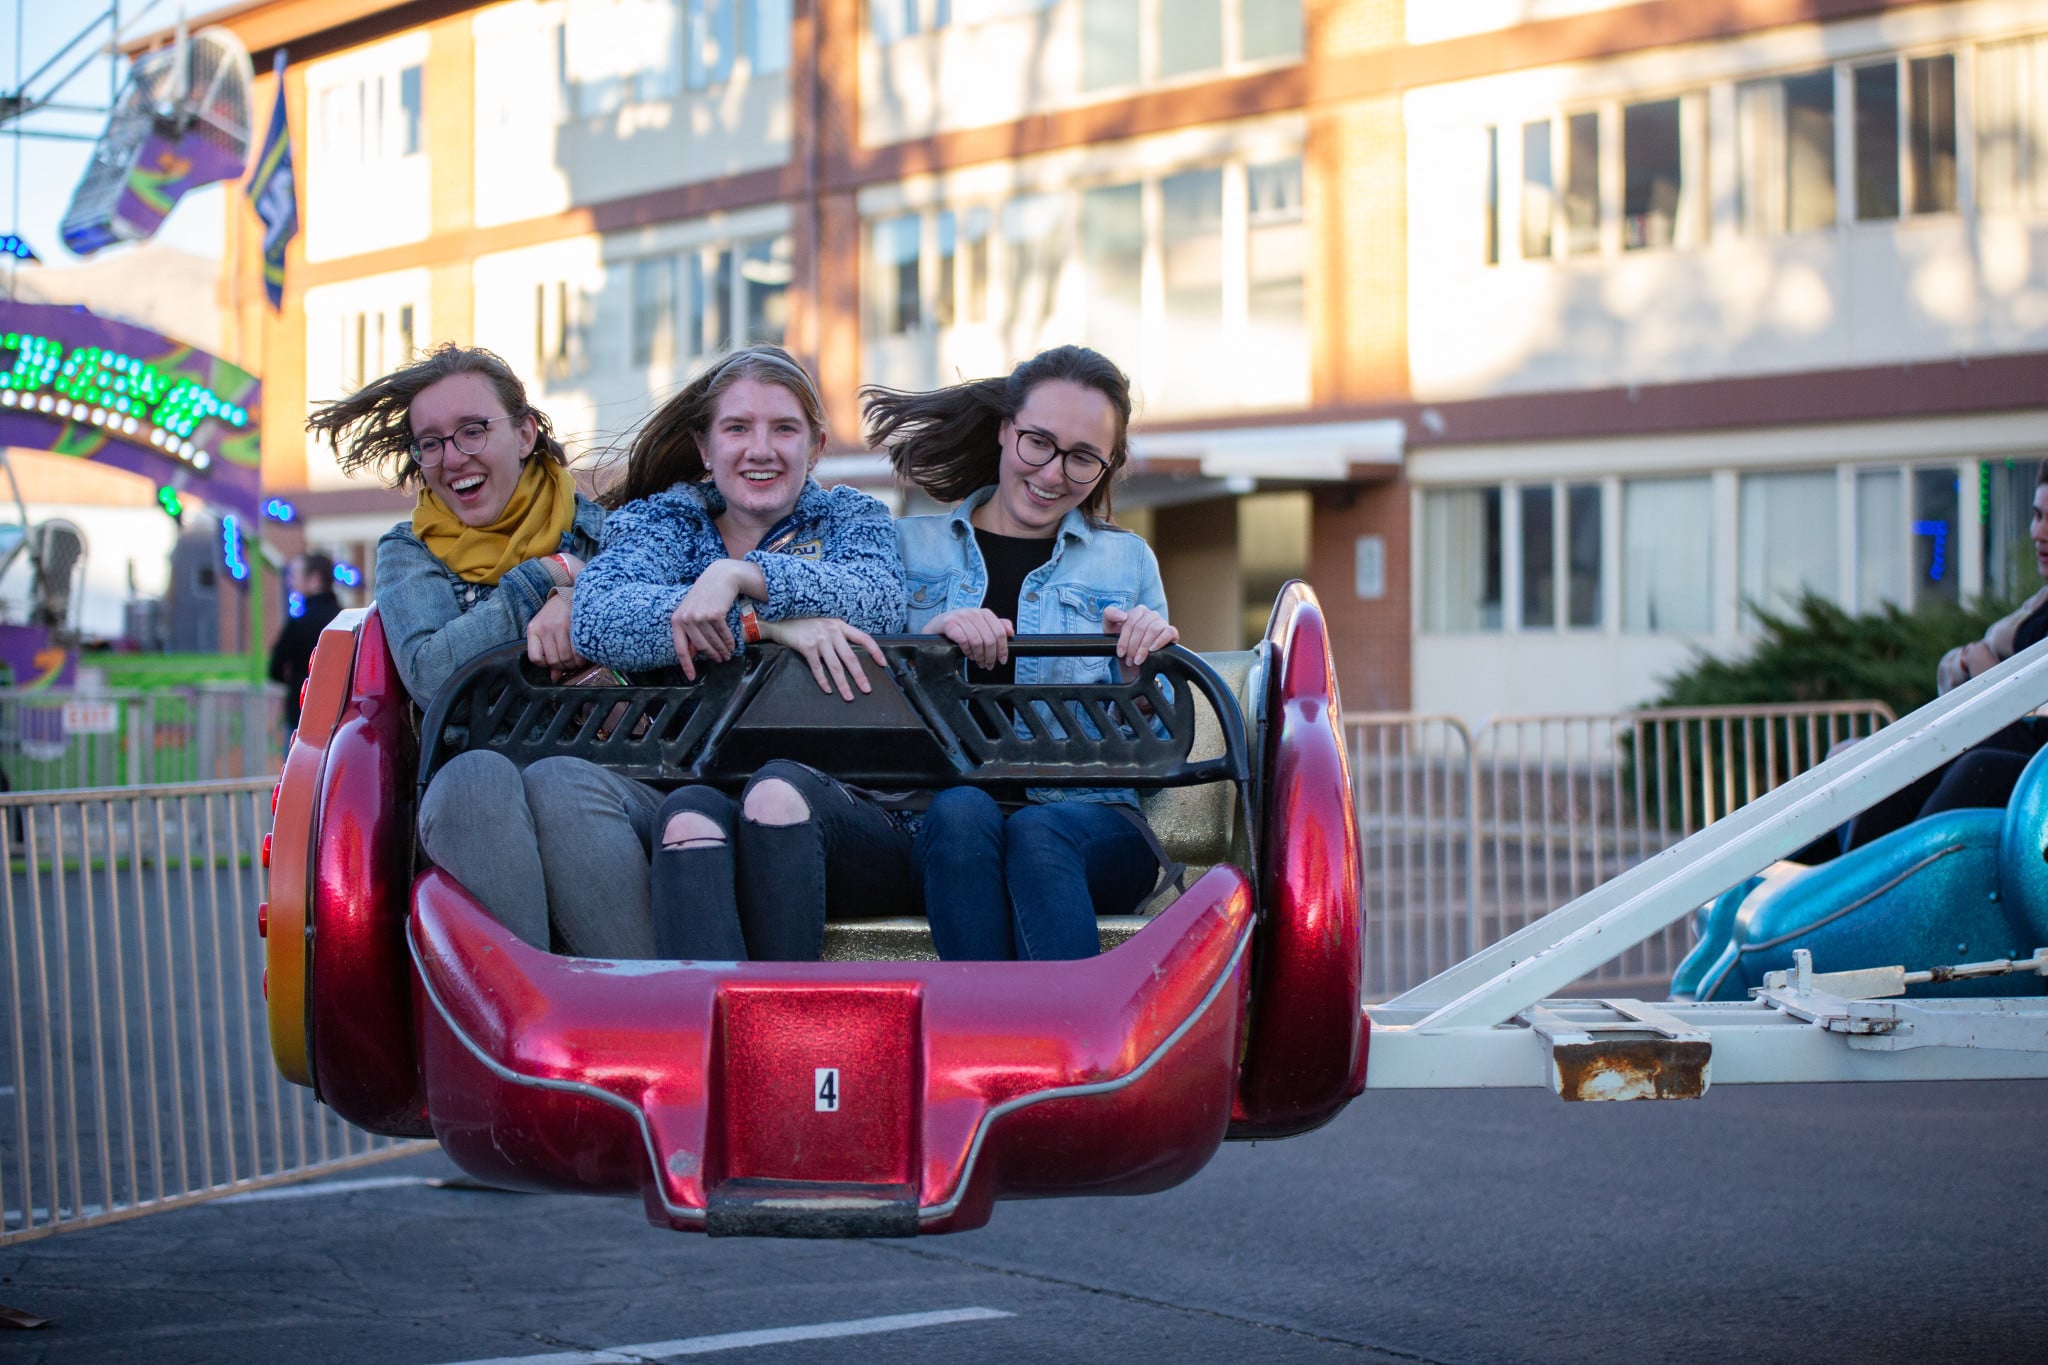 Three students seated together on a ride at the Homecoming carnival